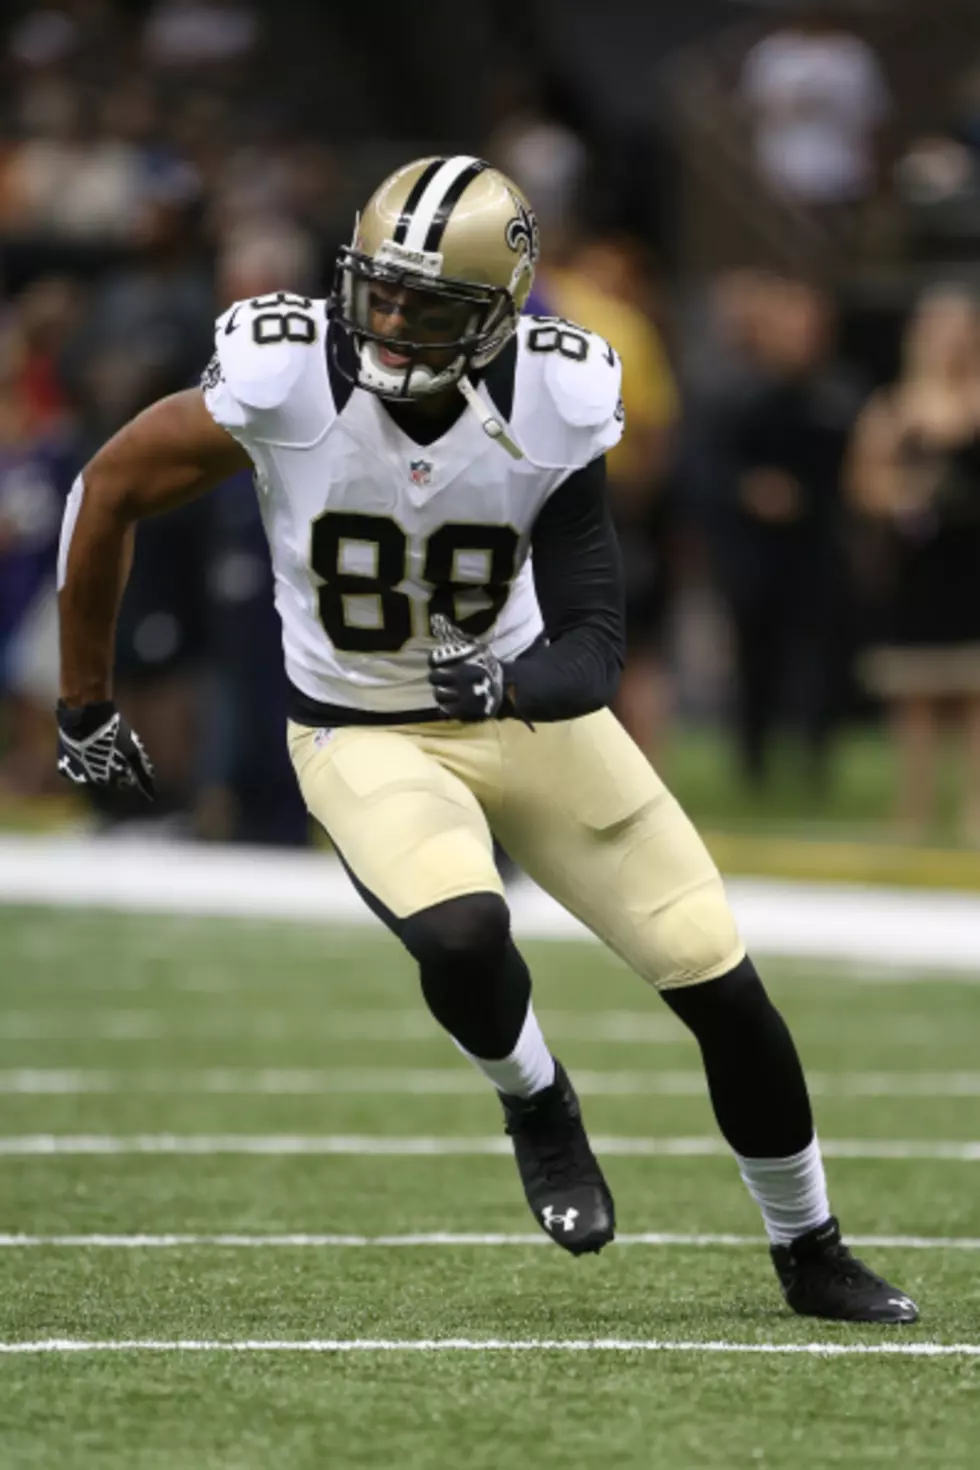 Saints Trim Roster To 75, List Of Players Waived/Cut